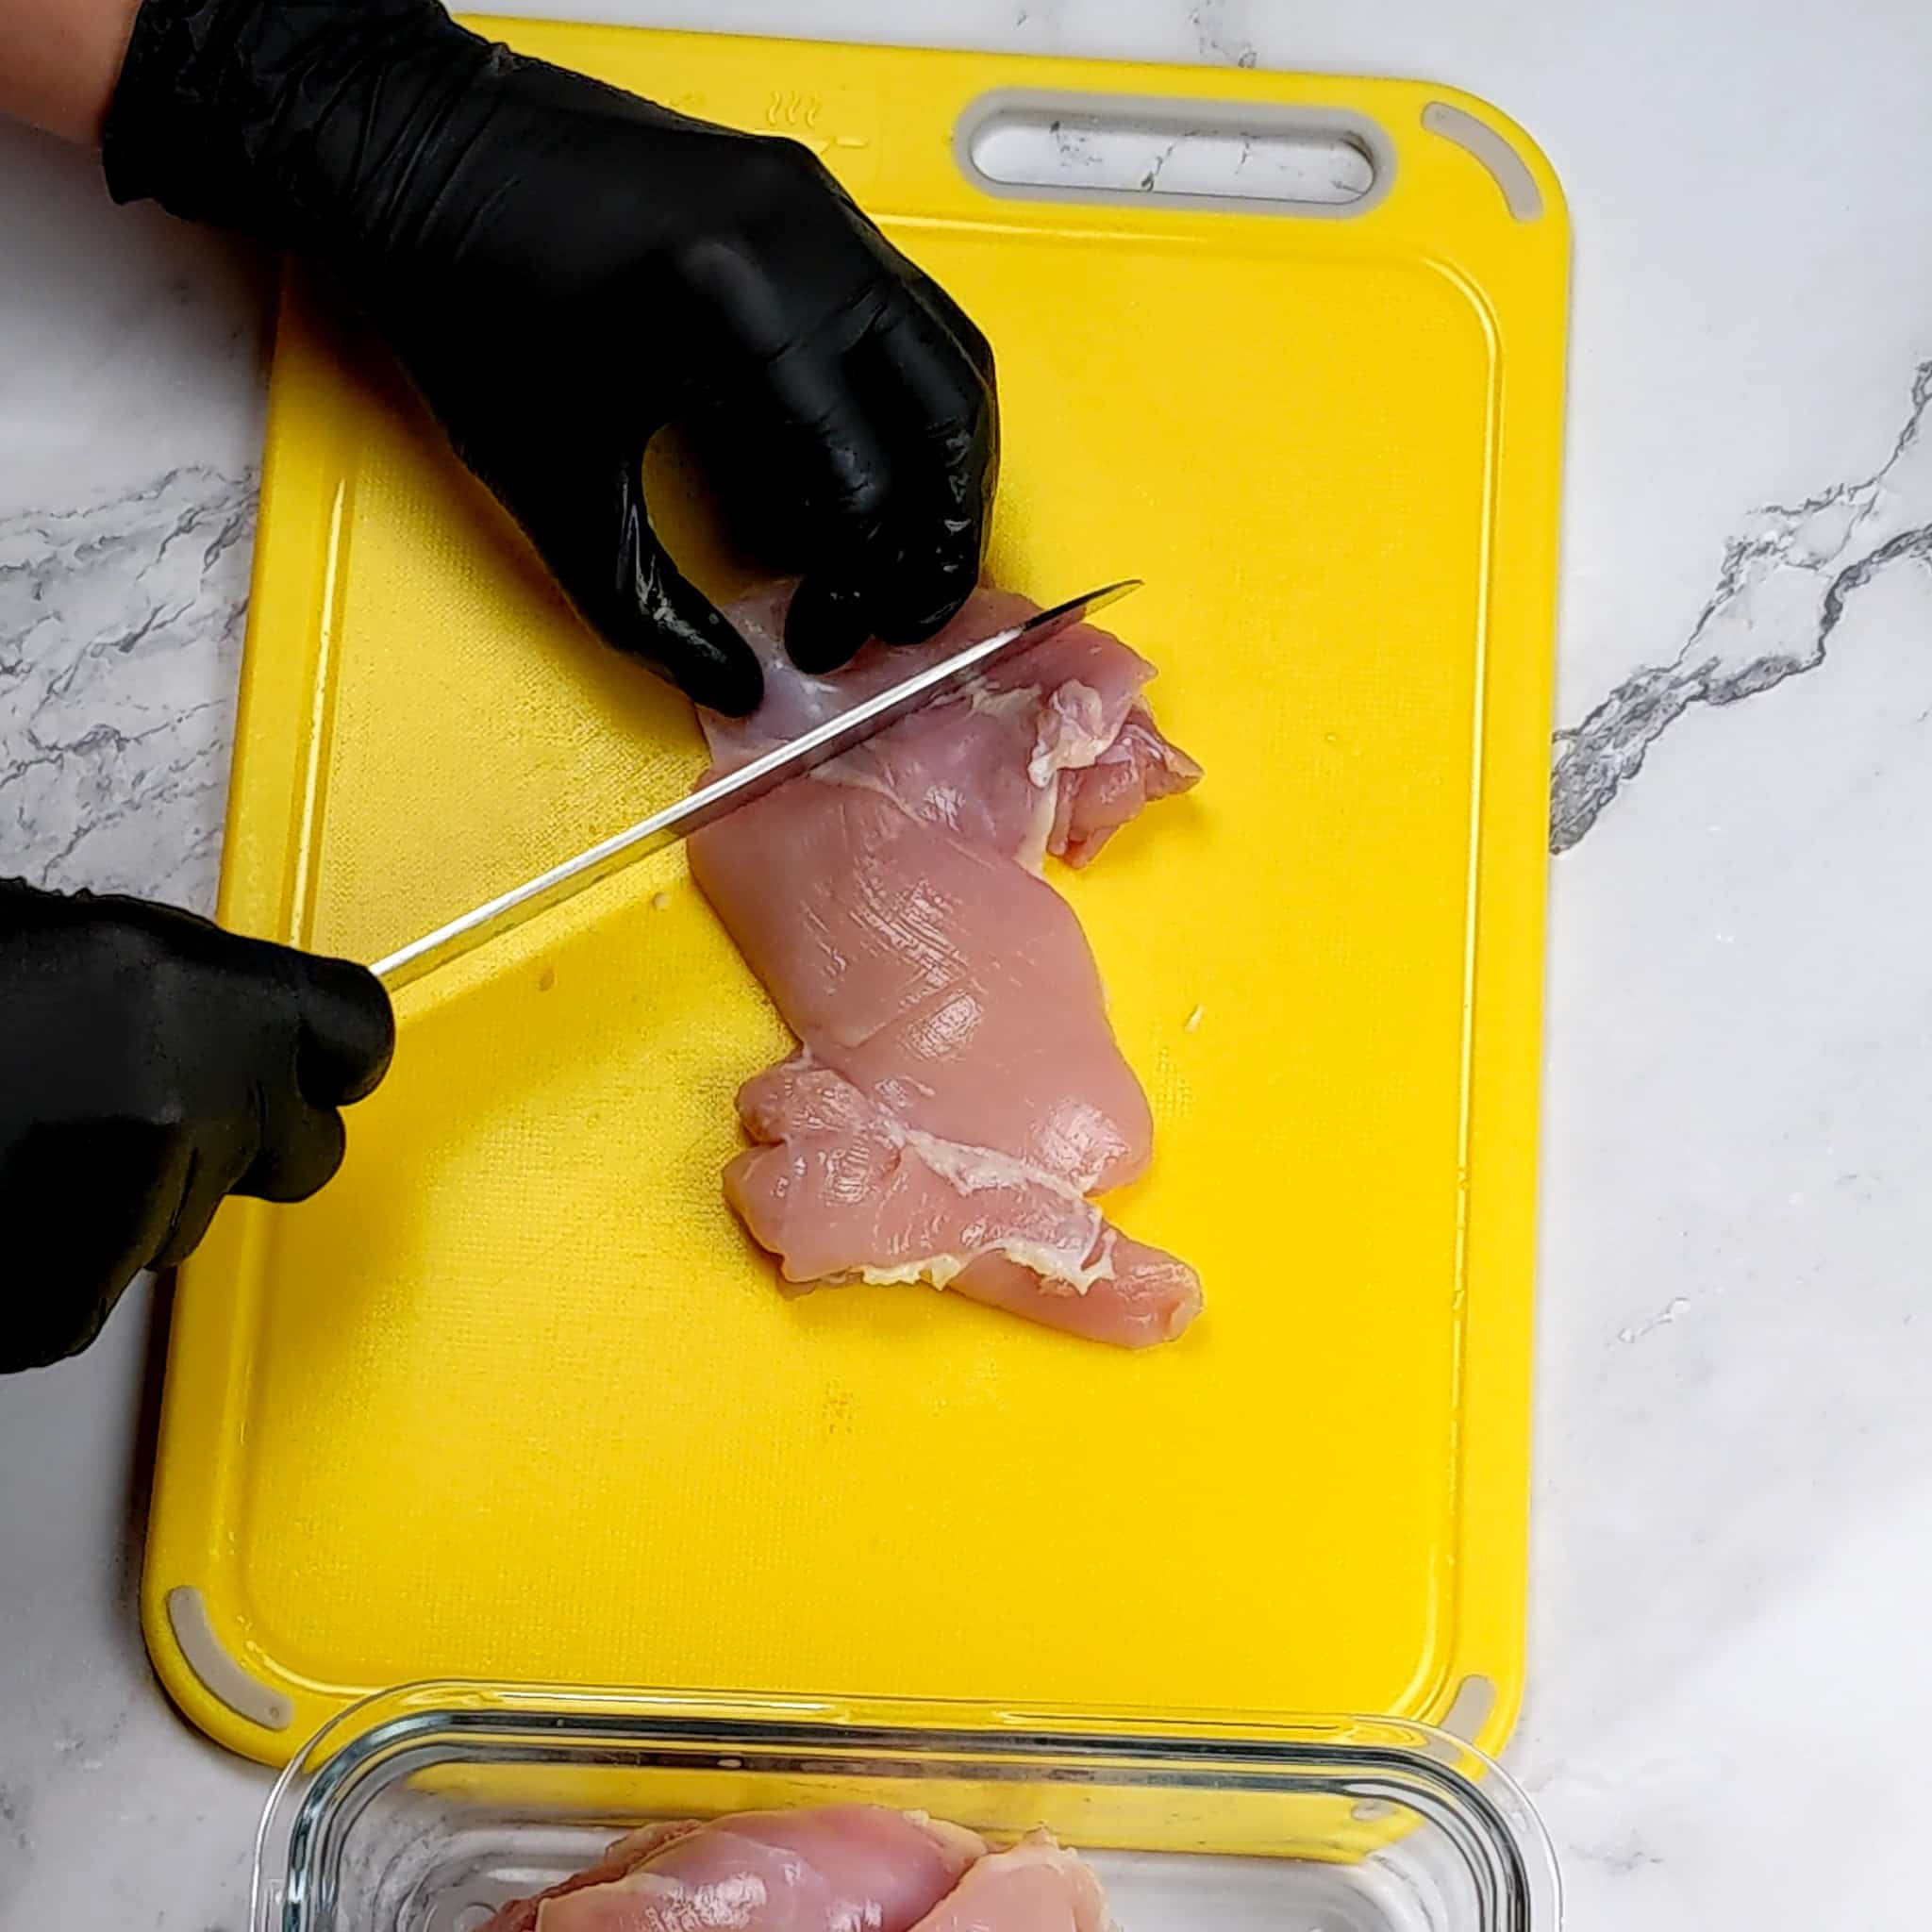 a chicken thigh being cut with a knife to create slits on a plastic cutting board.